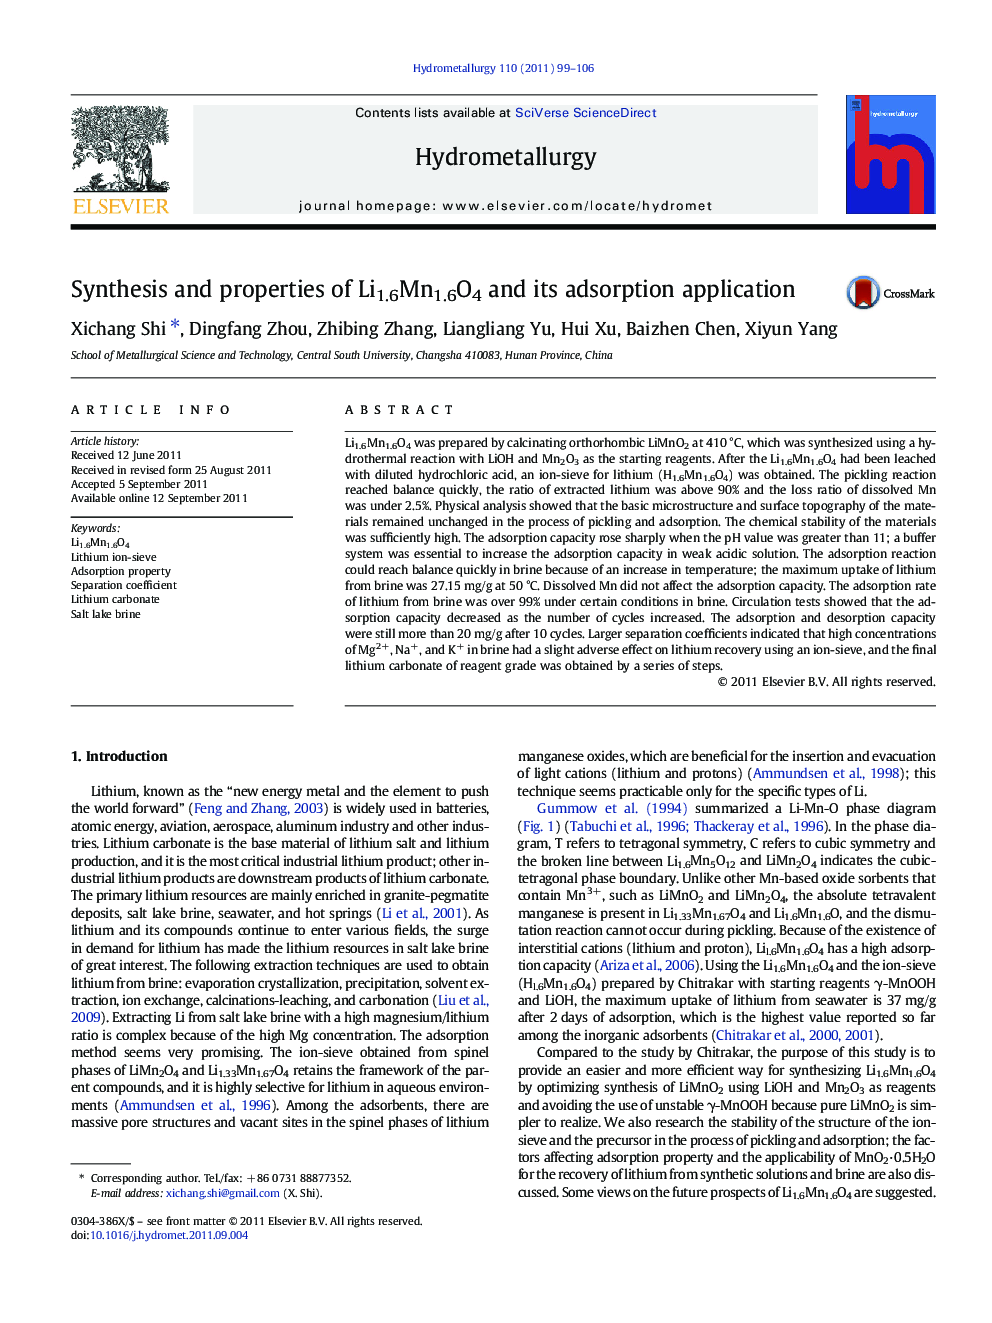 Synthesis and properties of Li1.6Mn1.6O4 and its adsorption application